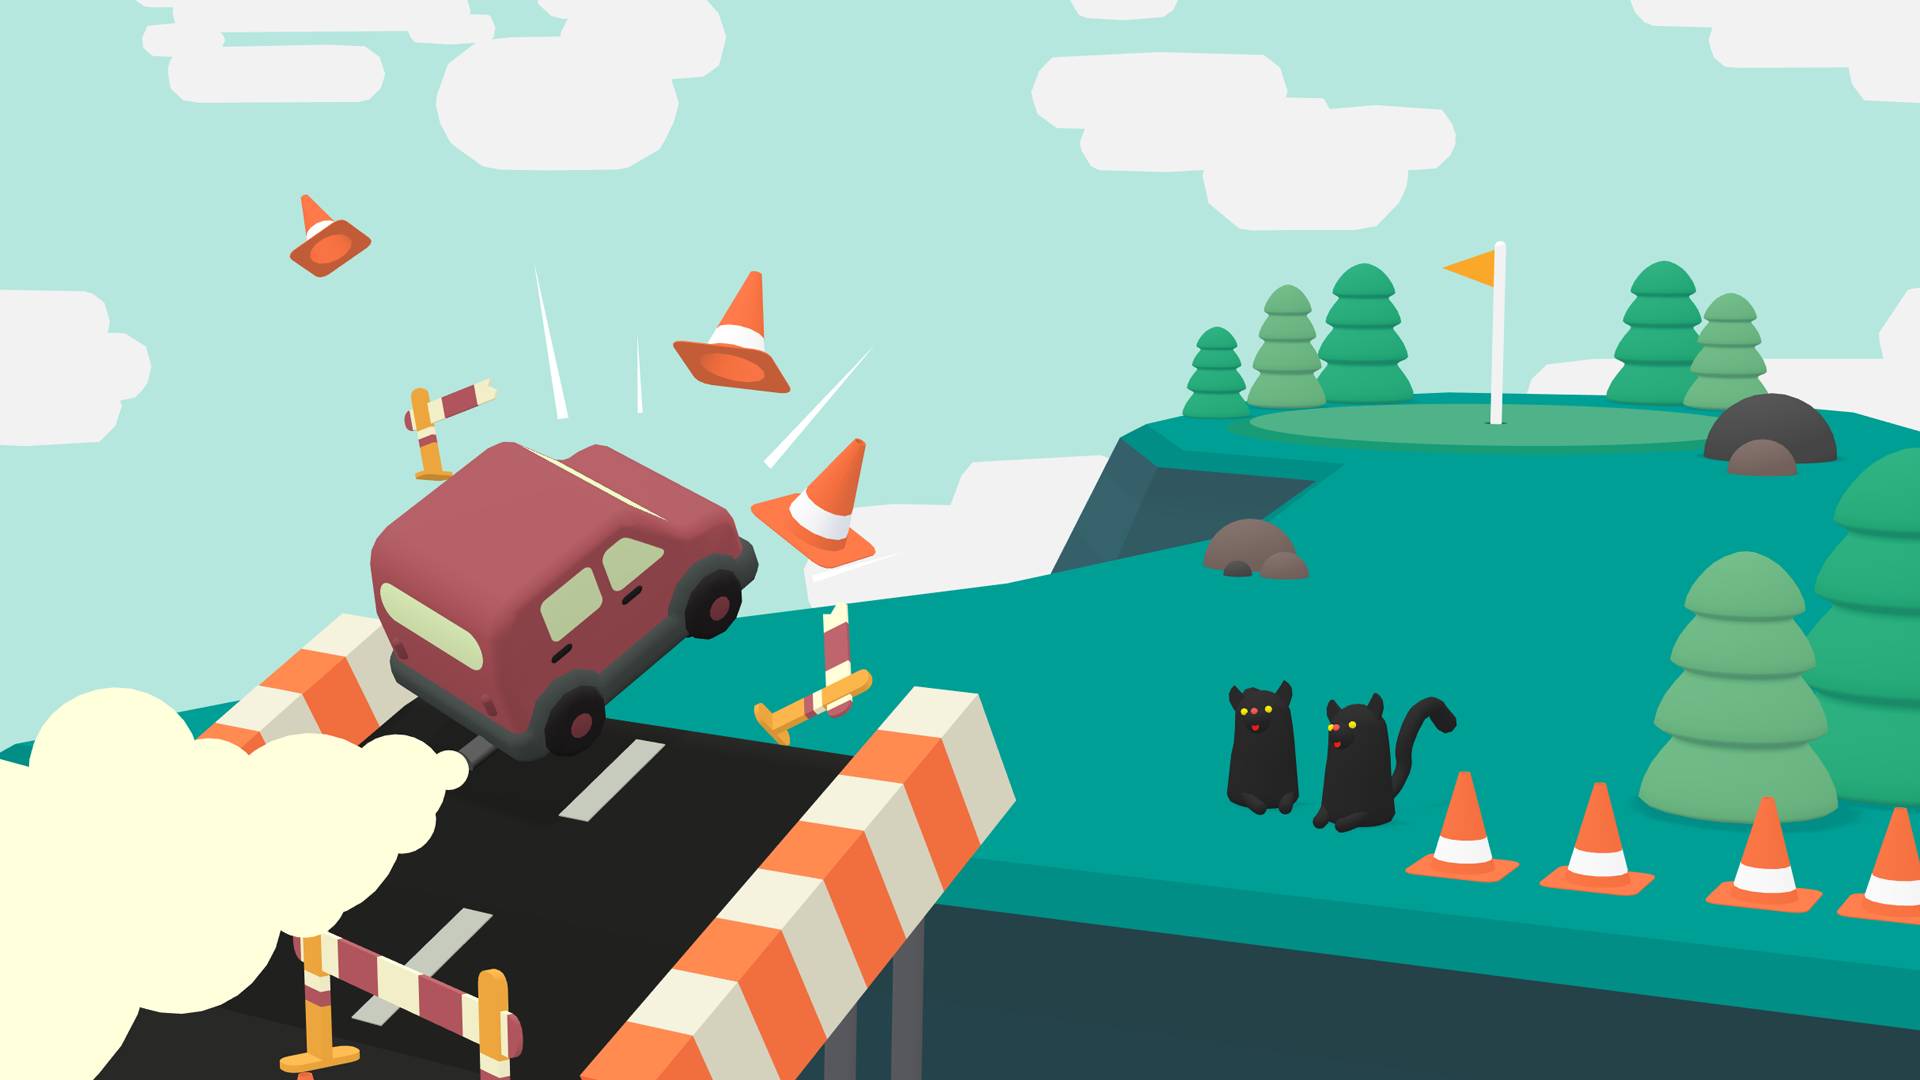 Funny games: a car launches from a ramp into the air, smashing cones and narrowly avoiding cats 